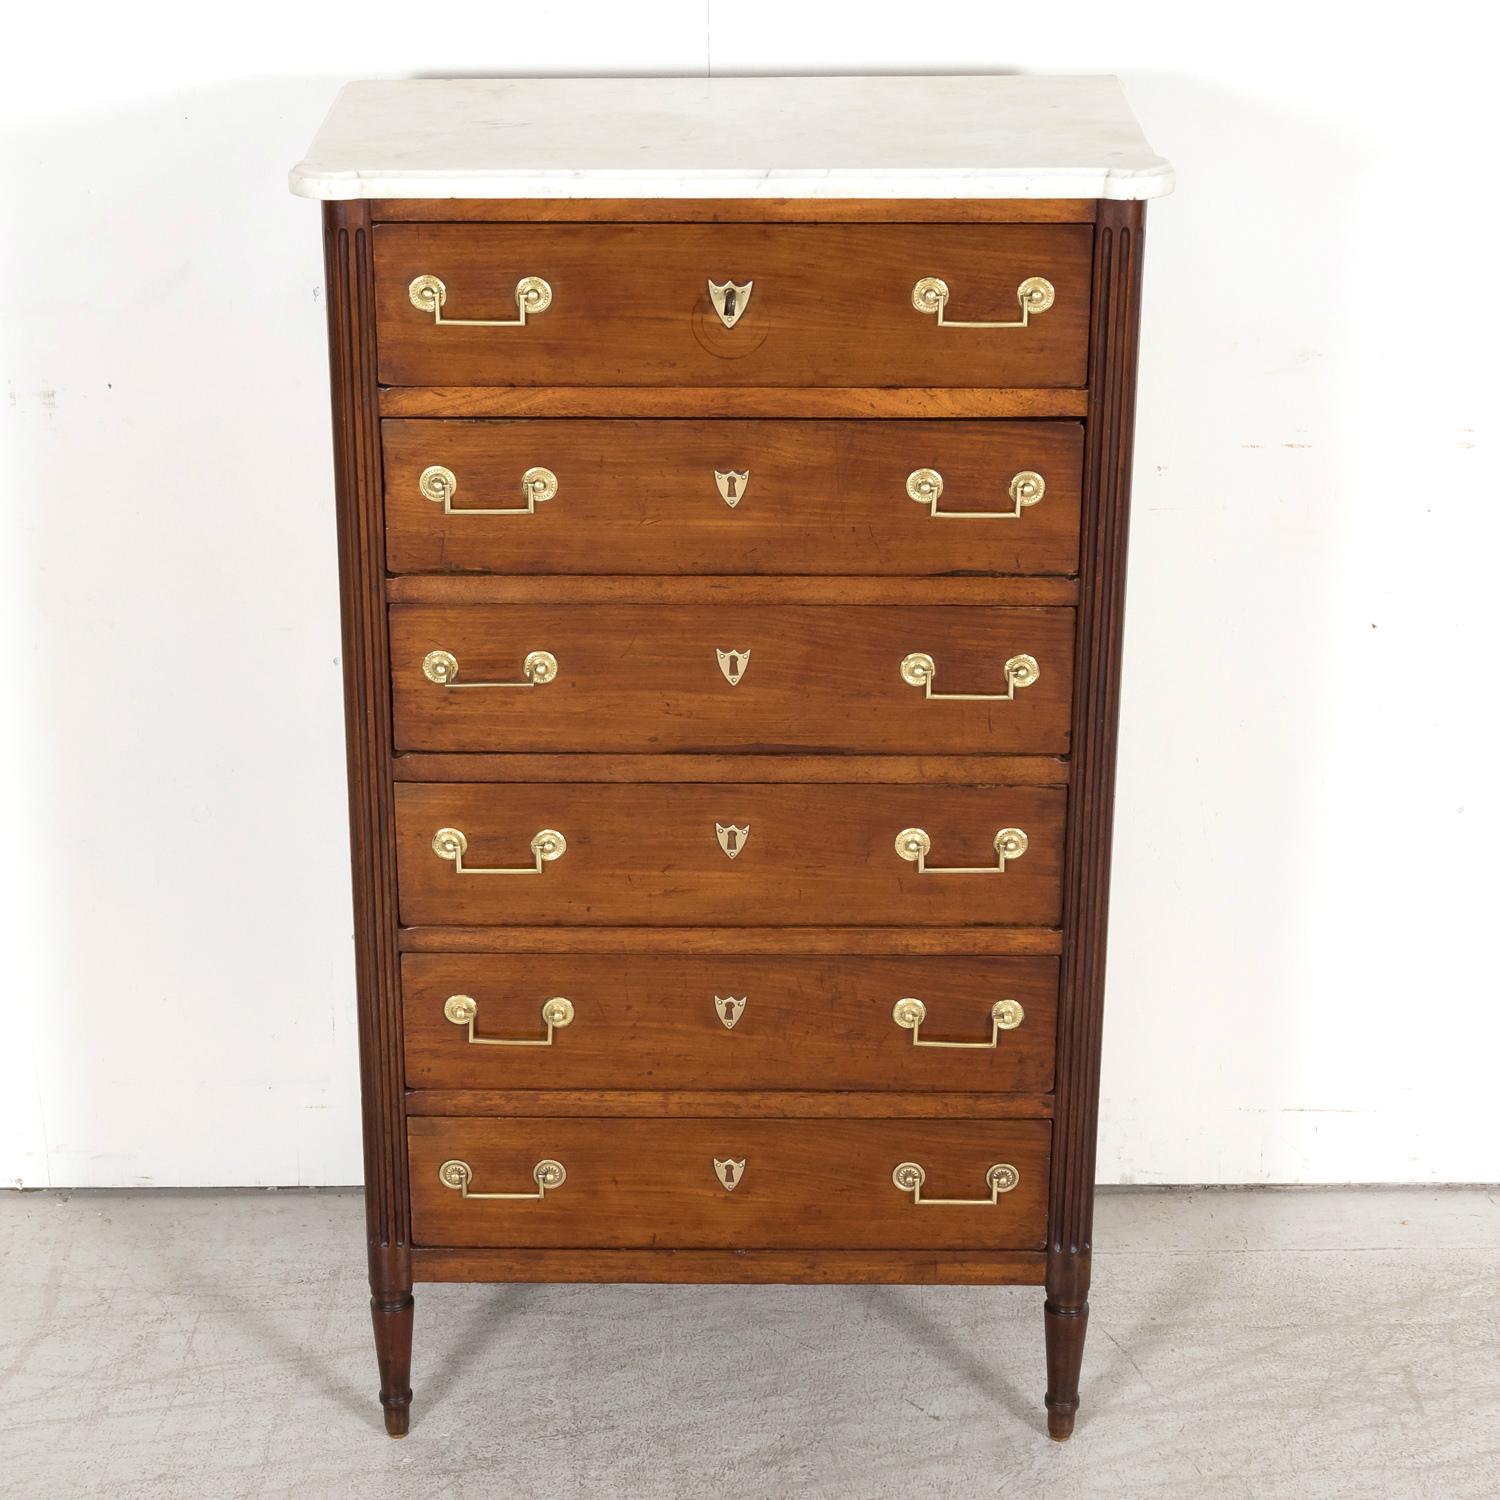 A handsome early 19th century French Louis XVI style chiffonier or tall gentleman's chest, circa 1810s, having a molded Carrara marble top with cookie cutter corners sitting atop six drawers adorned with original brass drop bail handles with stars